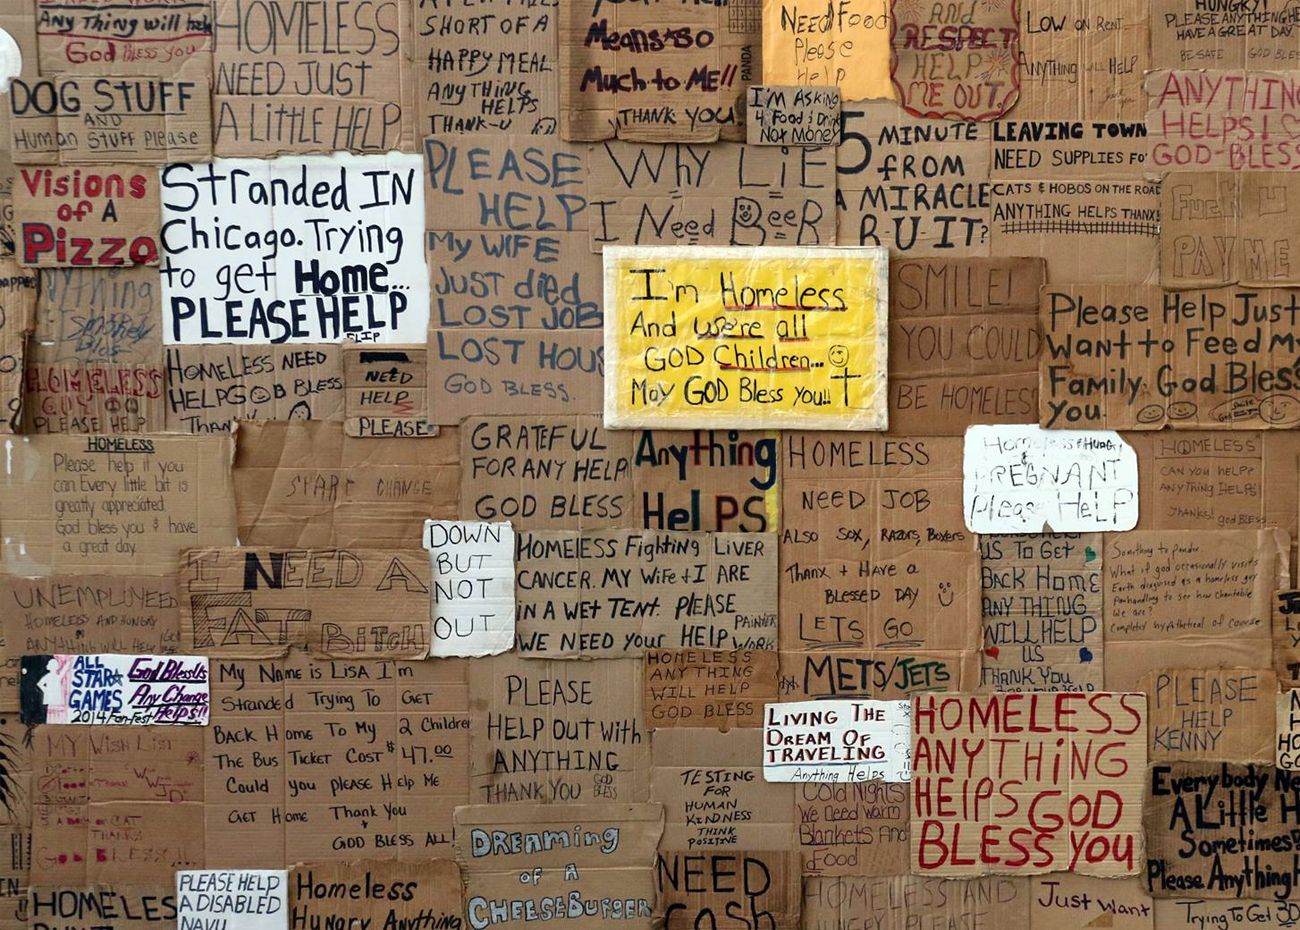 Wall covered in cardboard signs with various handwritten messages